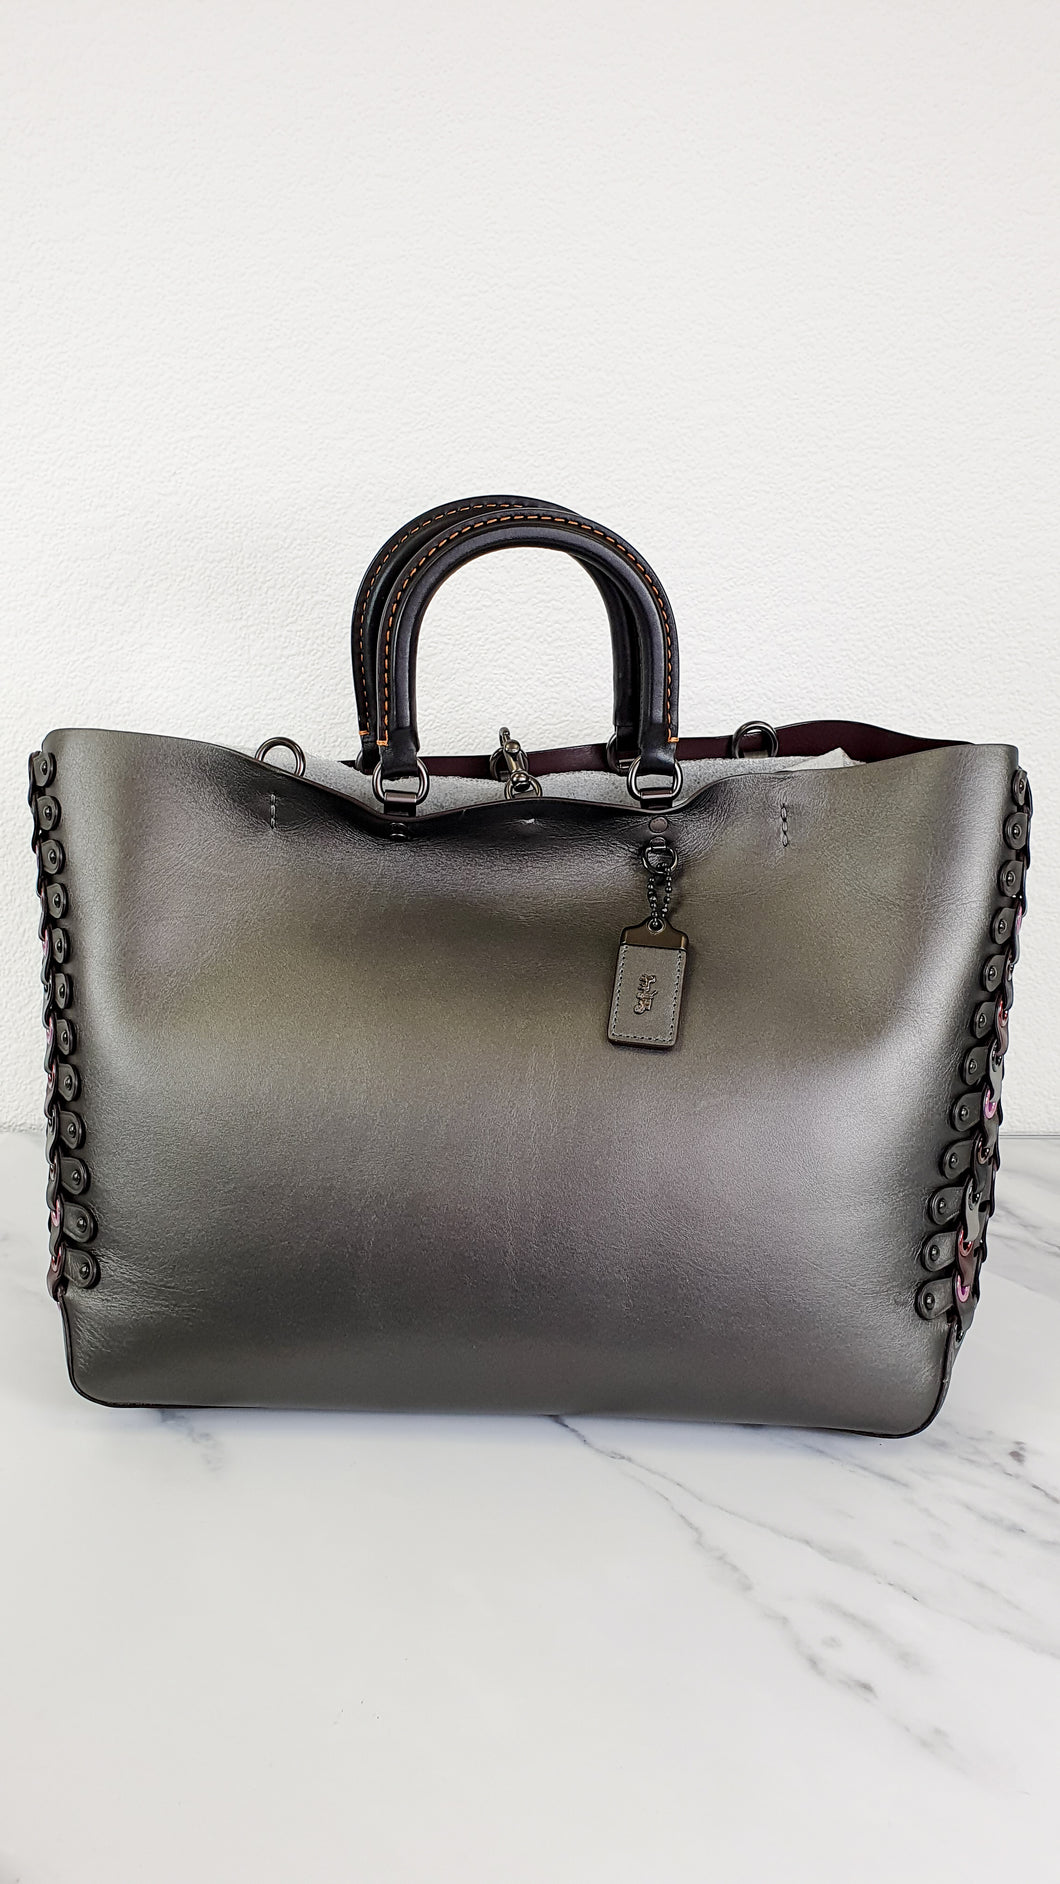 Coach 1941 Rogue Tote Bag With Links in Graphite Metallic Grey Smooth Leather Handbag Shoulder Bag - Coach 26887